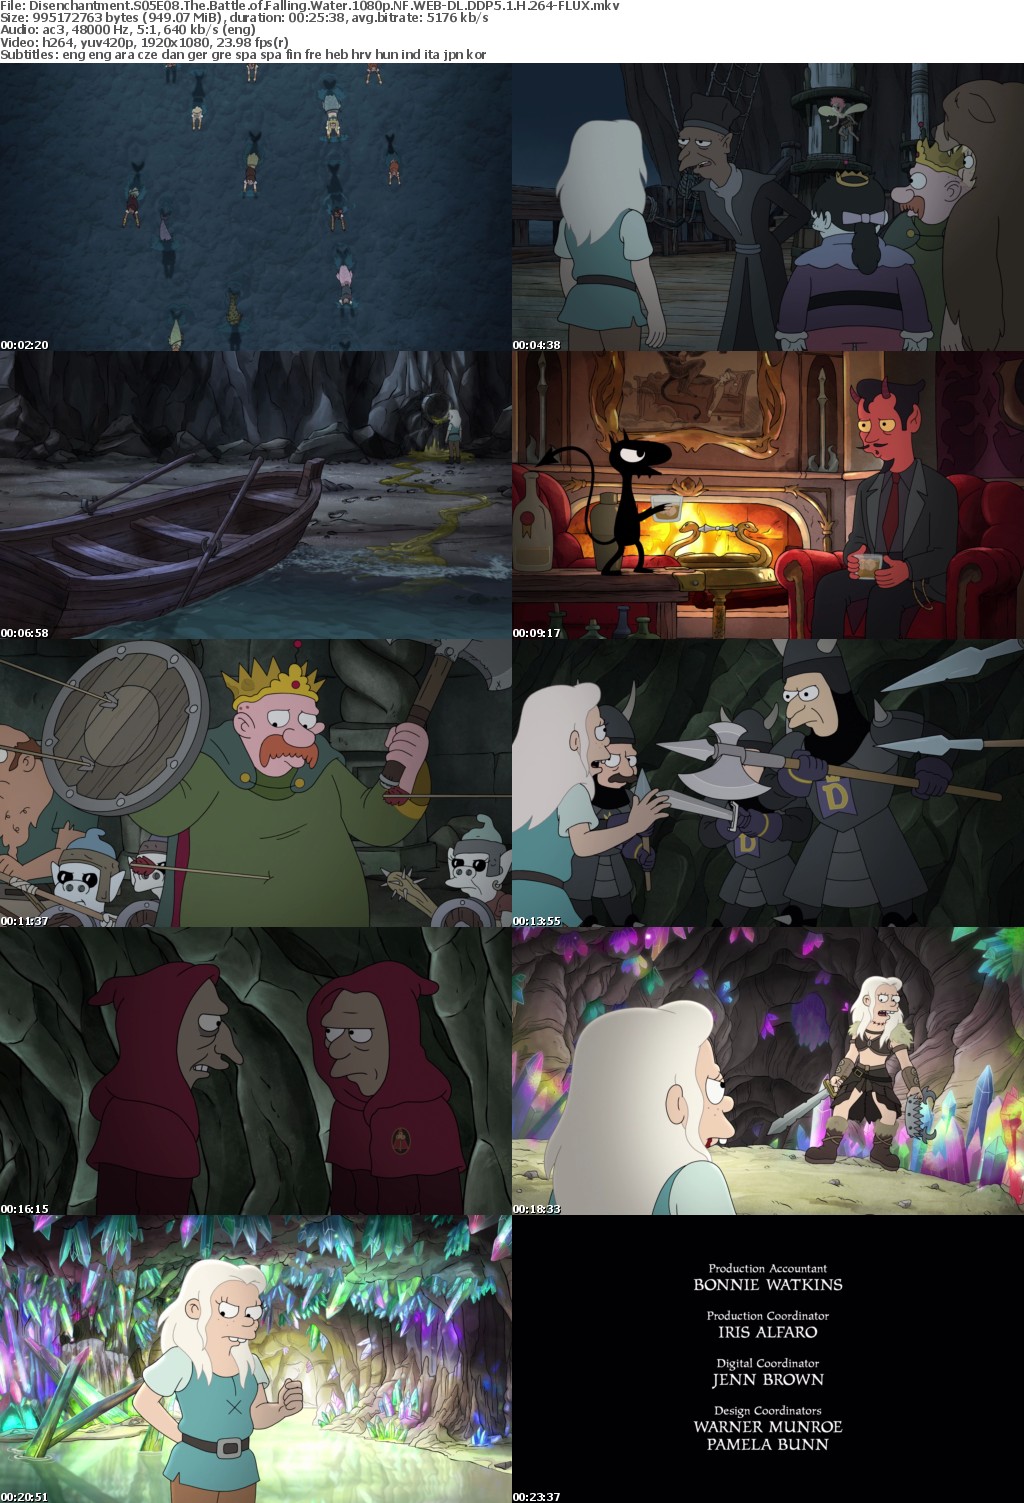 Disenchantment S05E08 The Battle of Falling Water 1080p NF WEB-DL DDP5 1 H 264-FLUX